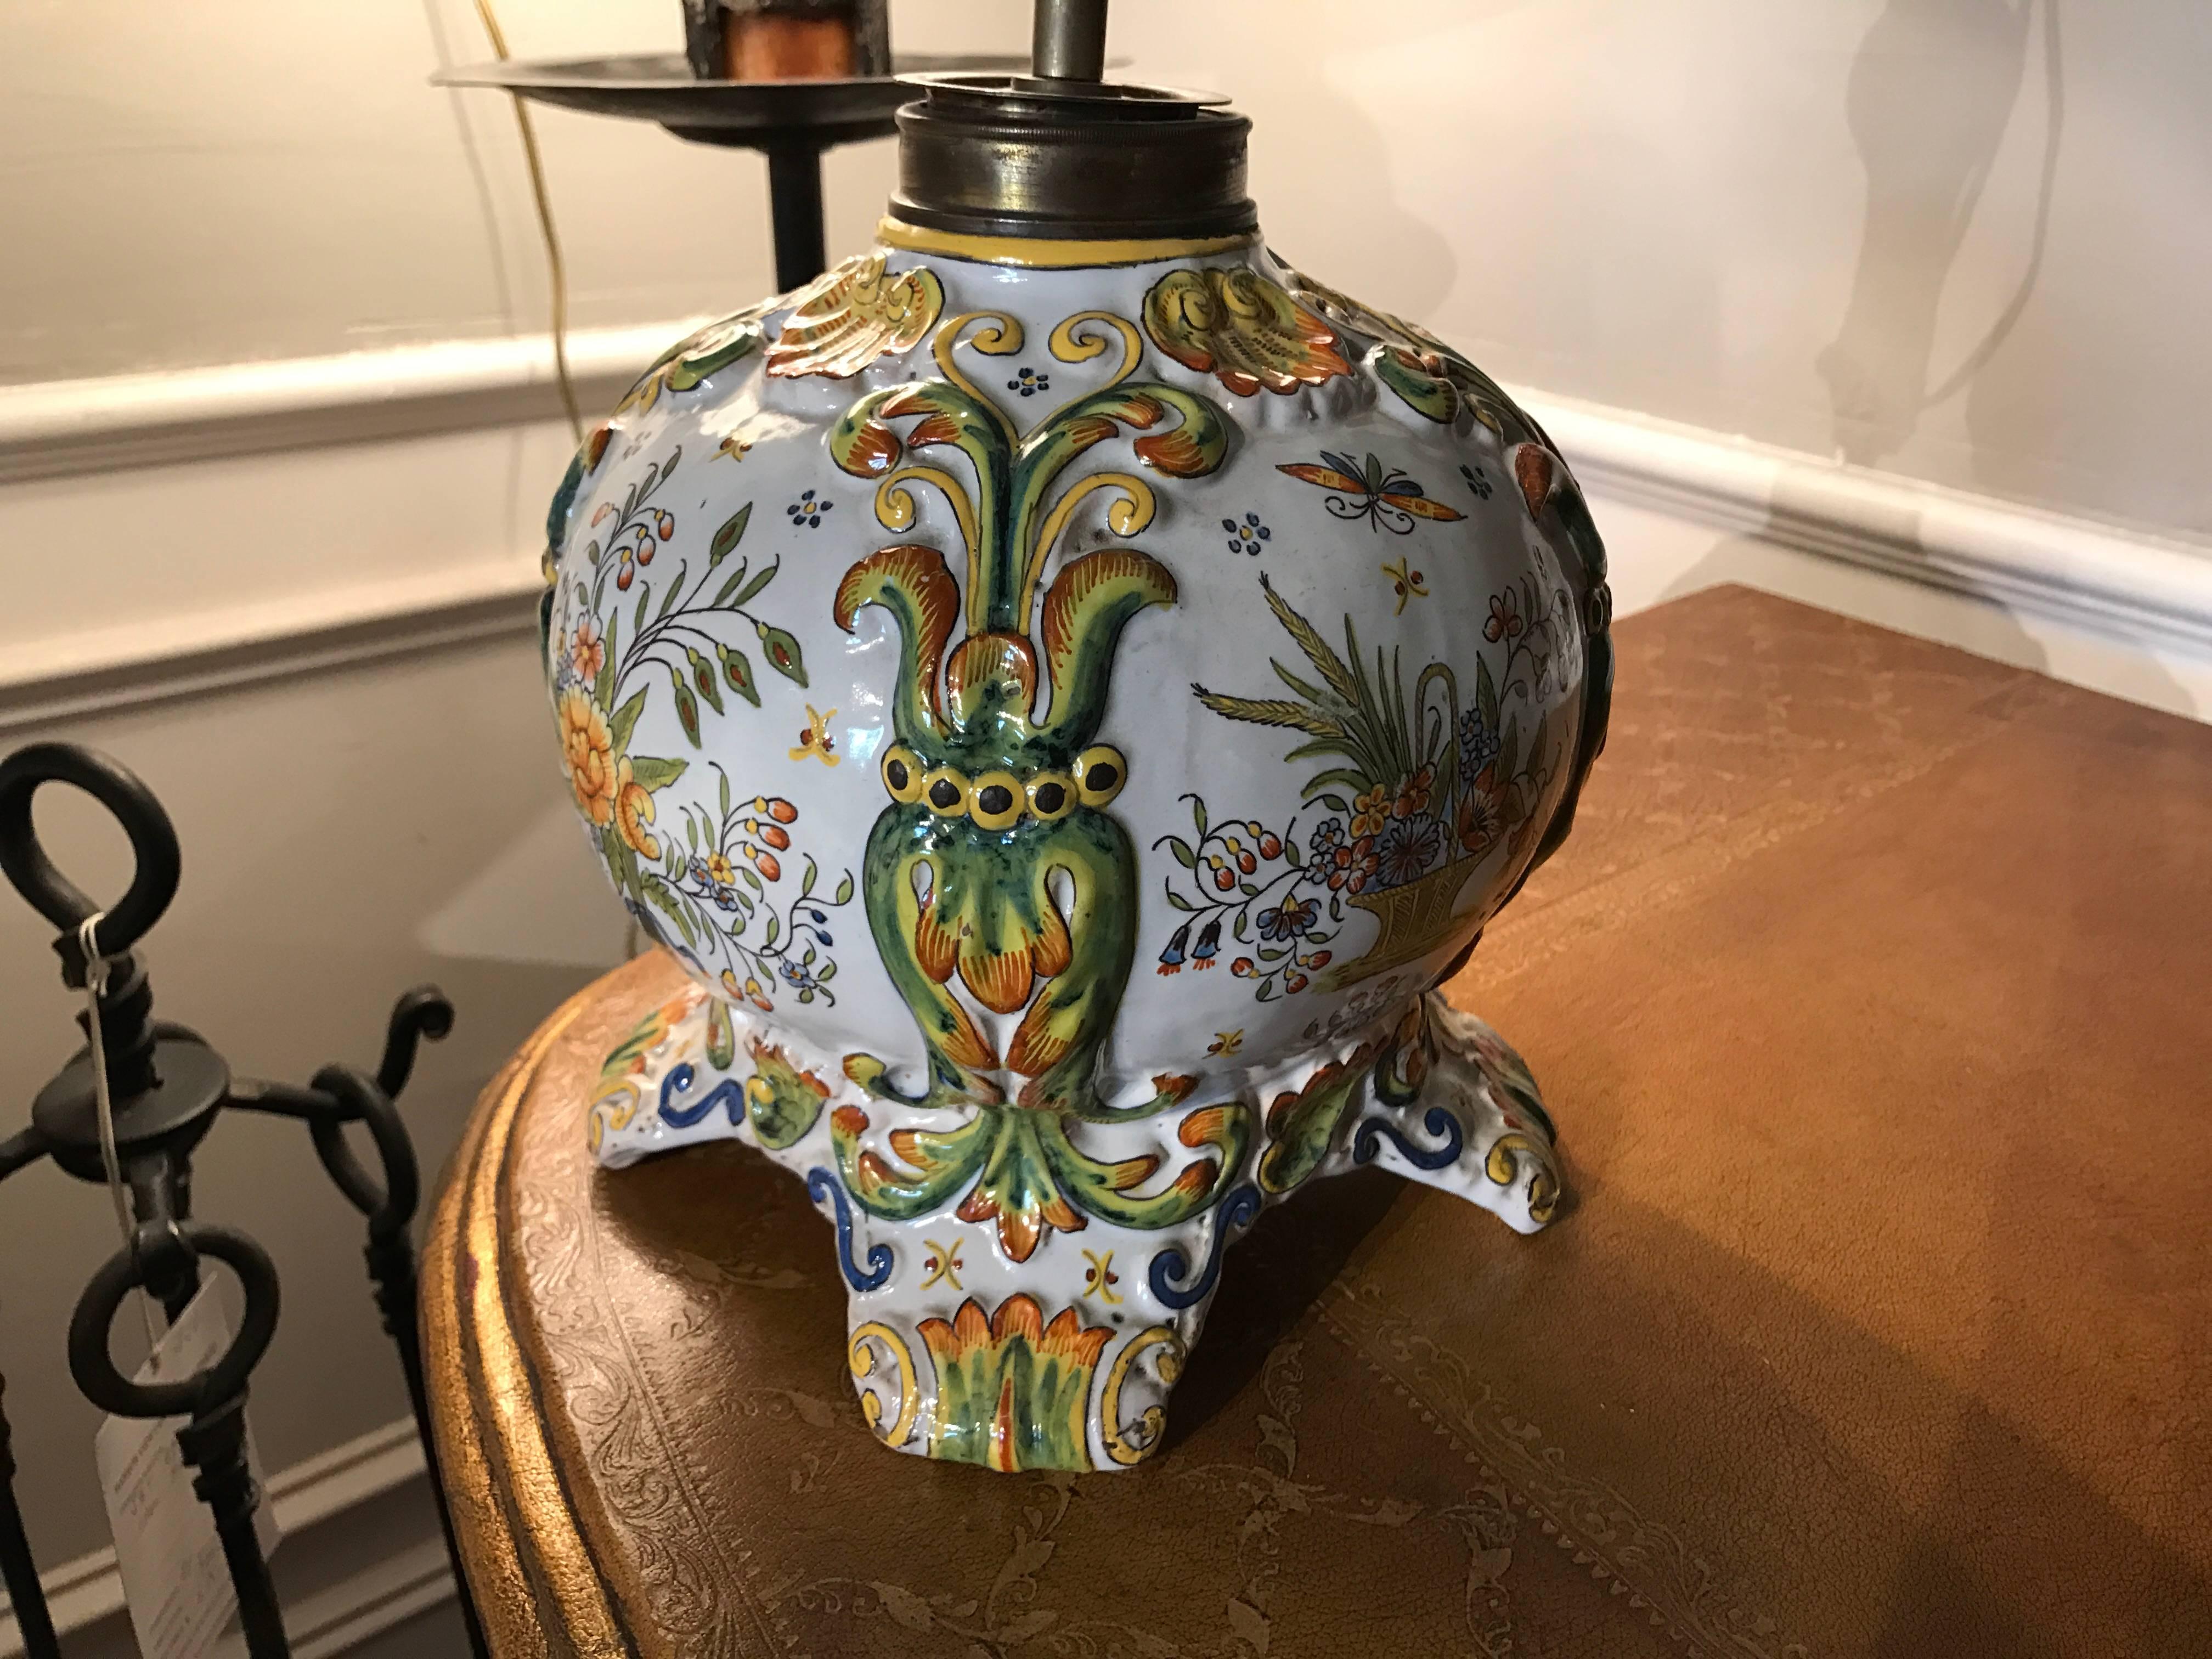 French glazed ceramic oil lamp now wired for electricity decorated in the bright colors typical of the Rouen style, with flower baskets and bouquets. Signed with the monogram FF, the signature for Fourmaintraux Freres. 

From the famous